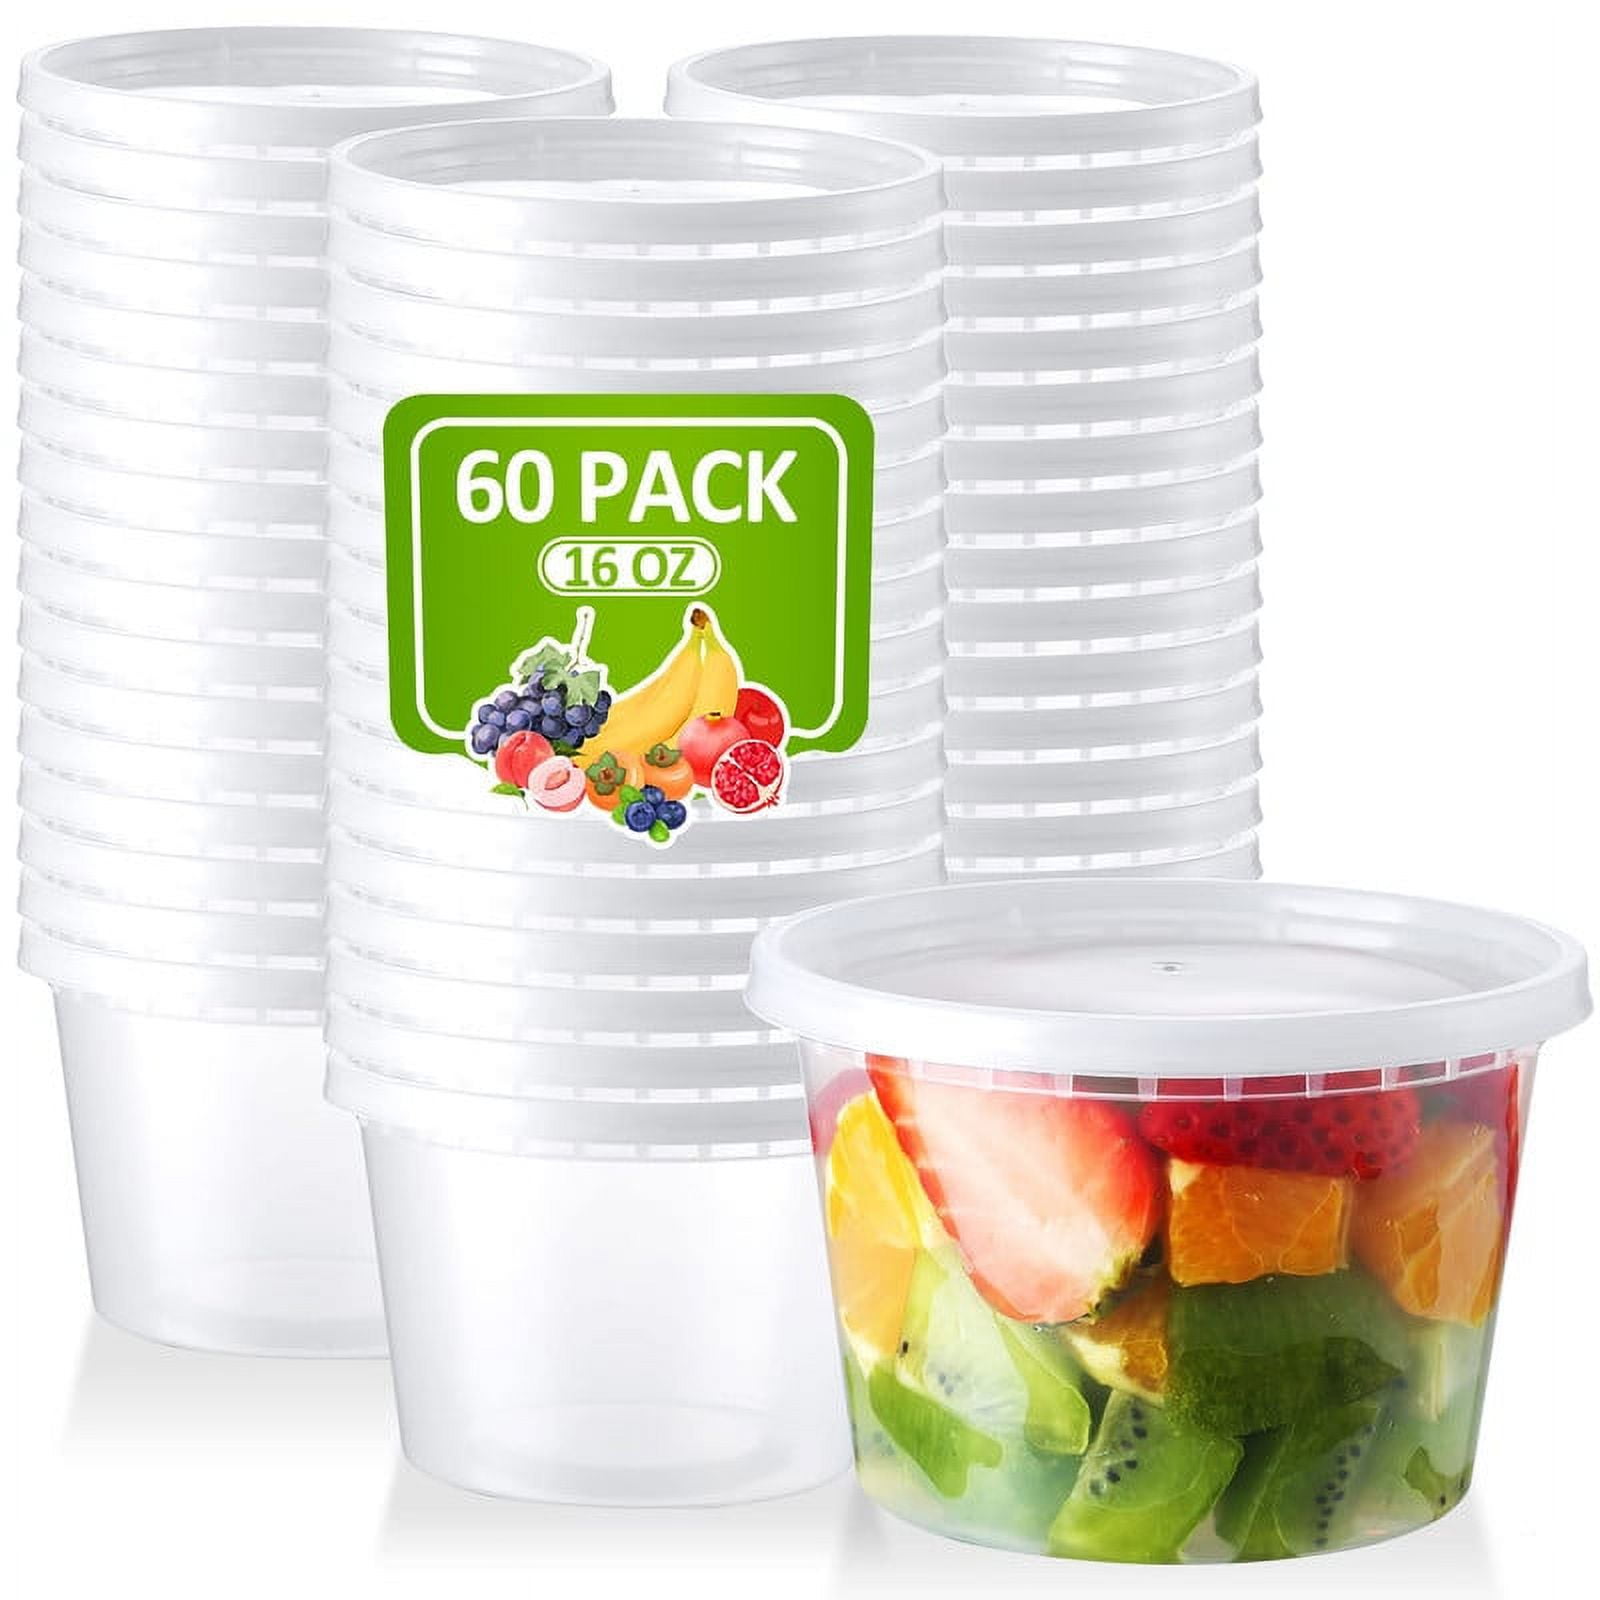 64 oz Deli Food Containers W/ Lids Plastic Tubs ounce Qty 5